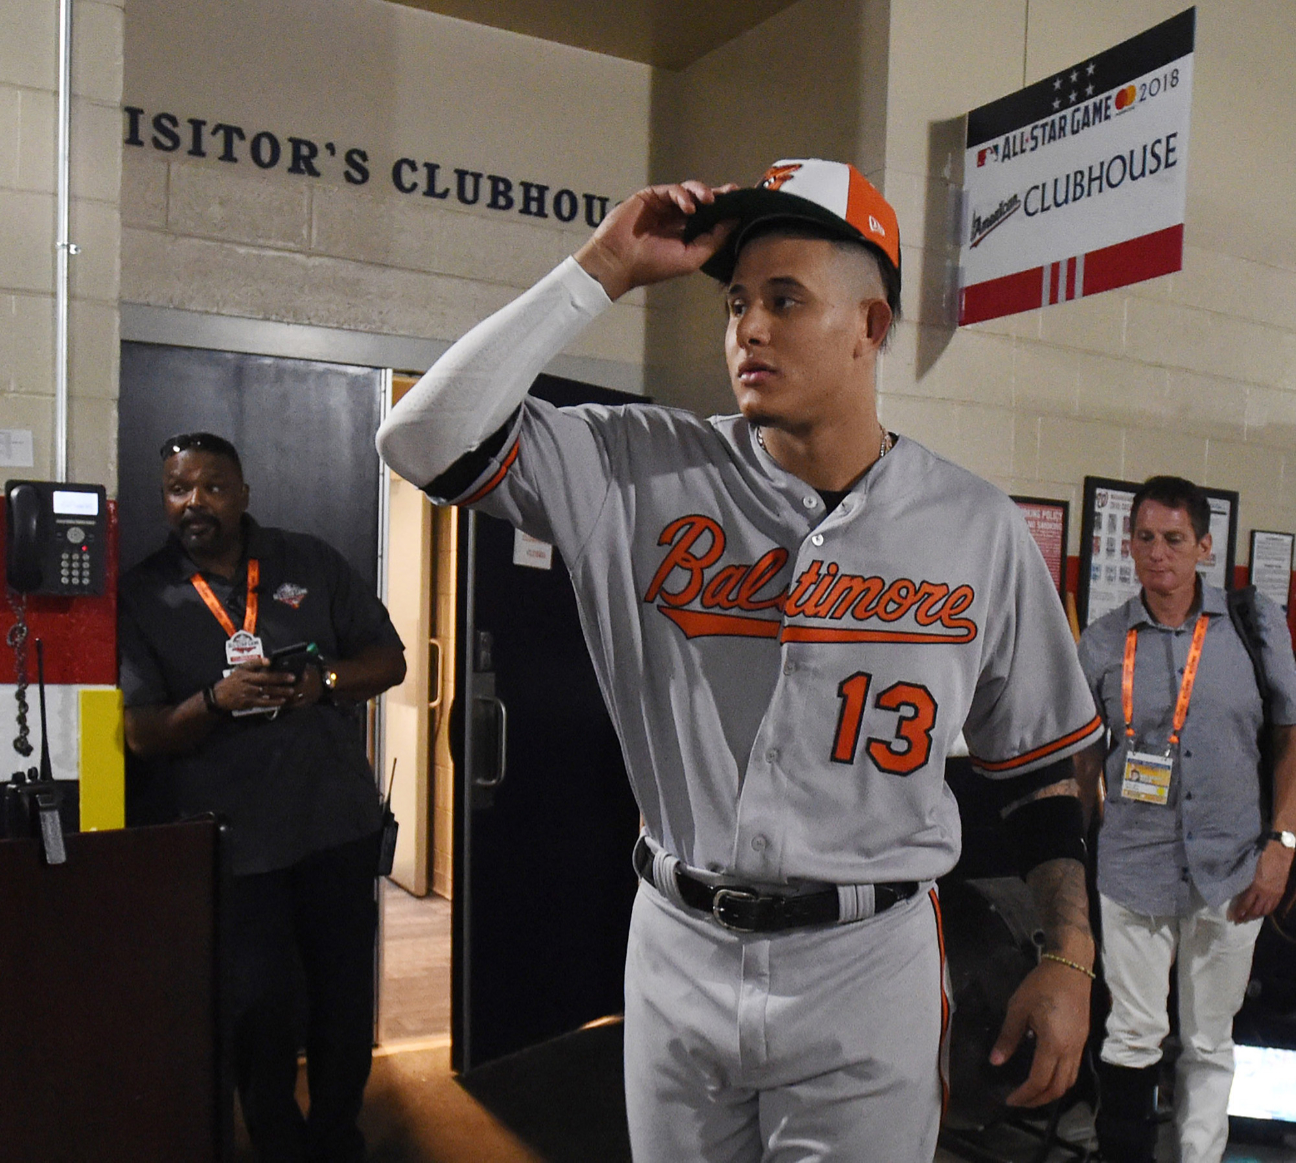 In a July 2018 file image, the Baltimore Orioles&apos; Manny Machado looks for his family outside the club house after playing in the Major League Baseball All-Star Game at Nationals Park in Washington, D.C. (Kenneth K. Lam/Baltimore Sun/TNS)